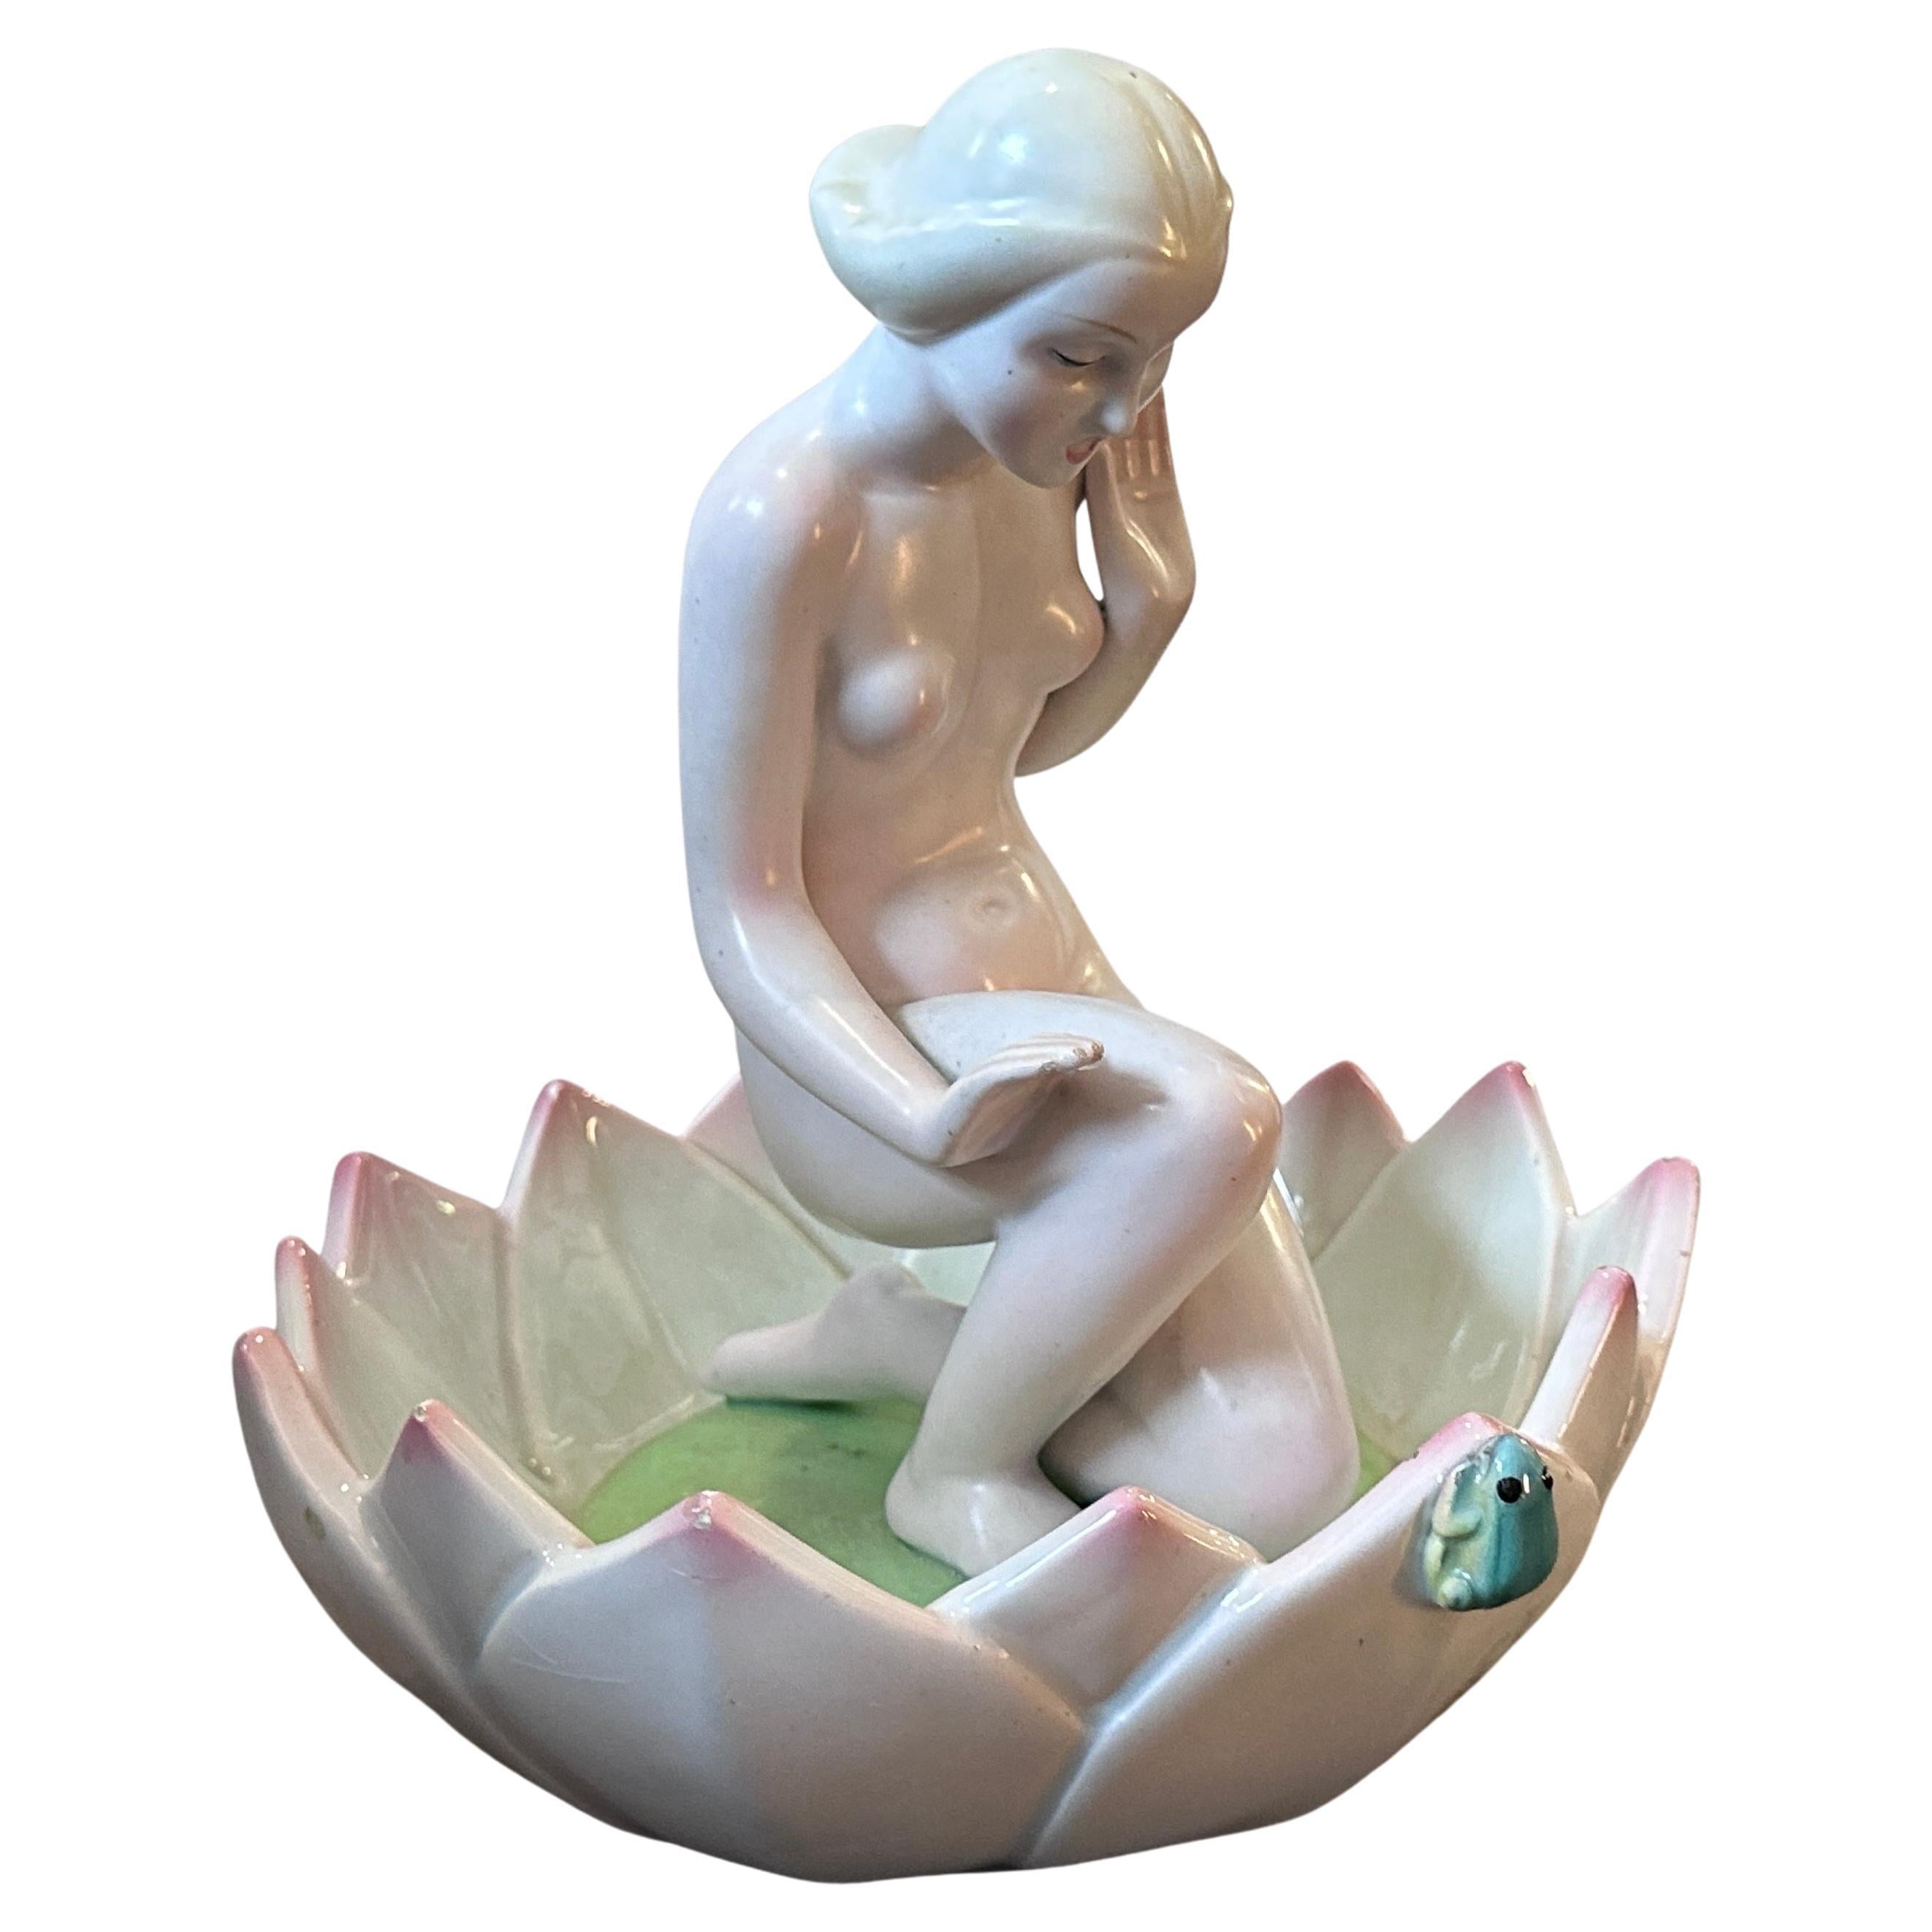 1940s Art Deco Porcelain Figure of a Woman on a Flower by Giovanni Ronzan For Sale